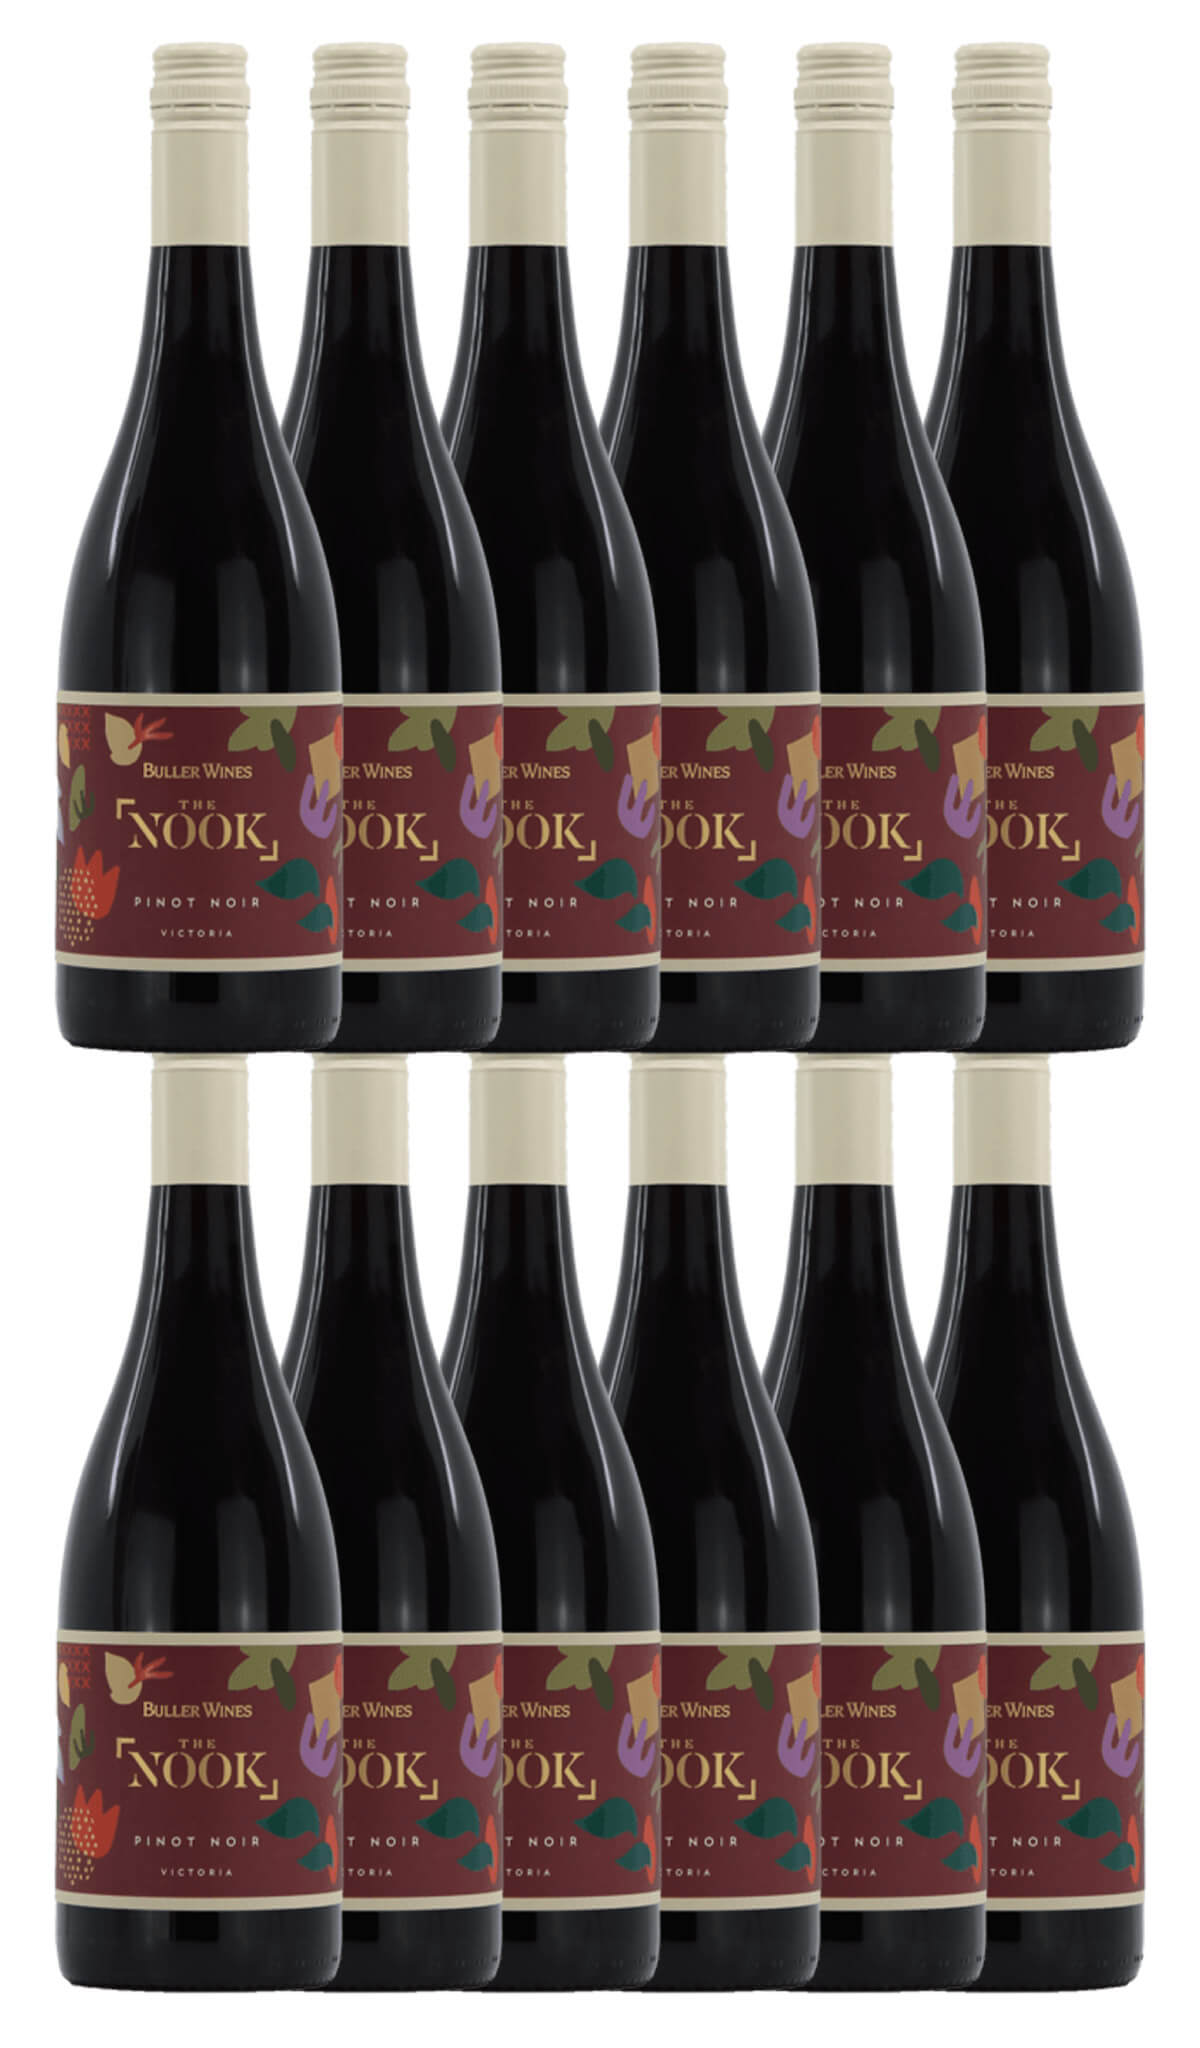 Find out more, explore the range and purchase Buller The Nook Pinot Noir 2022 (Rutherglen) dozen wine deal available online at Wine Sellers Direct - Australia's independent liquor specialists.